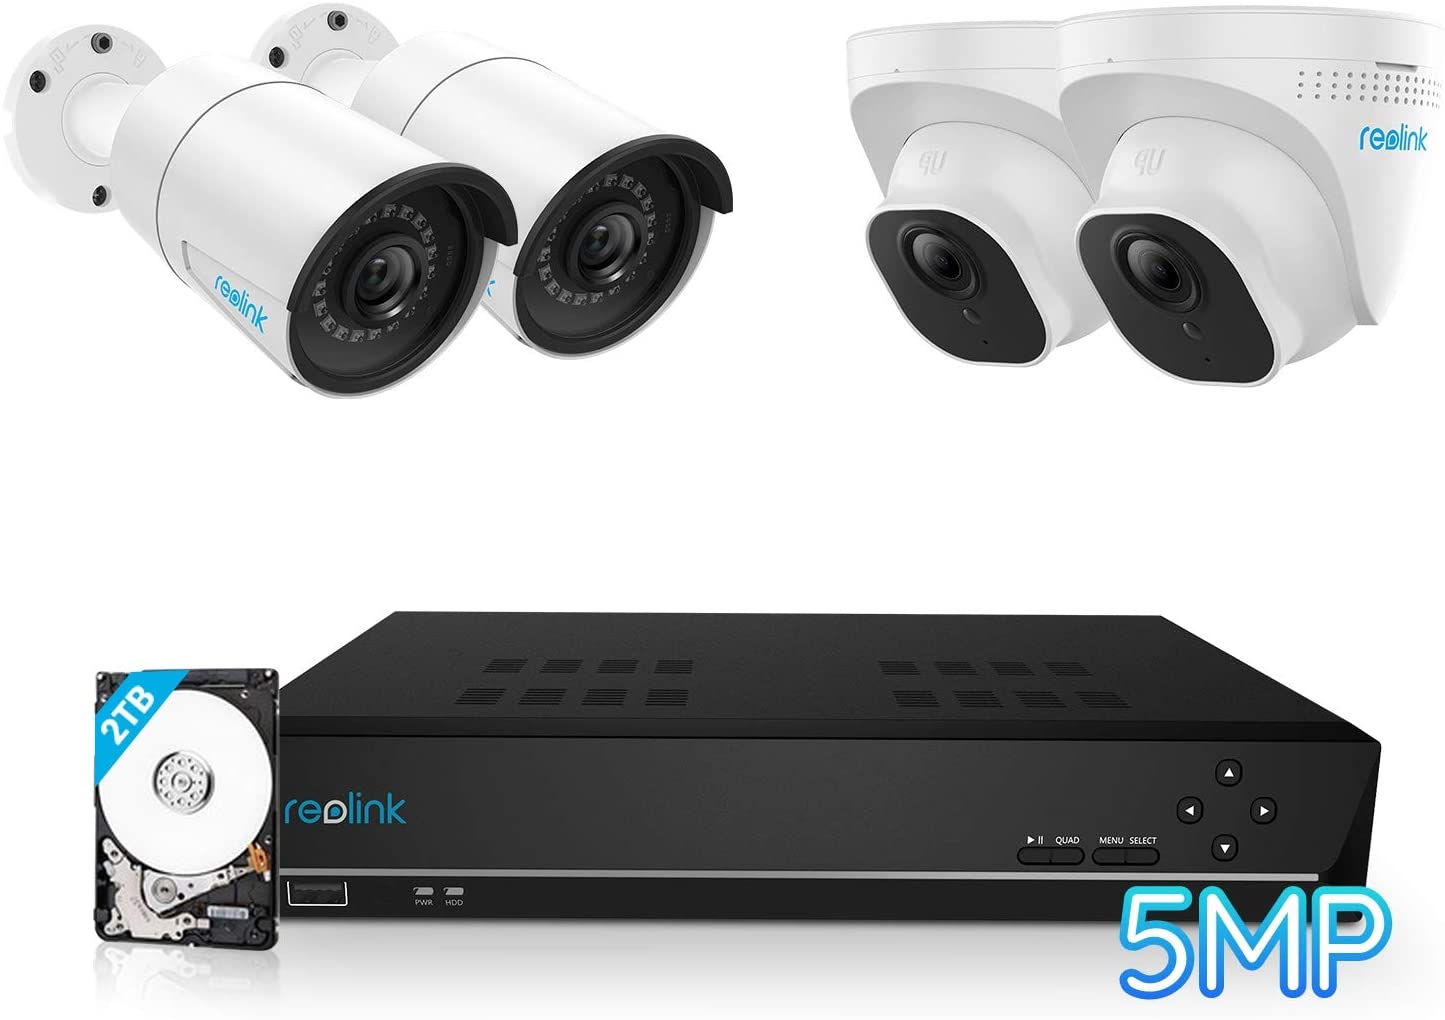 Reolink RLK8-410B2D2-5MP PoE Surveillance Camera System with 4 x 5 MP Outdoor IP Cameras with 8 Channel NVR 2TB Hard Drive Audio German App PC Software Browser Enabled